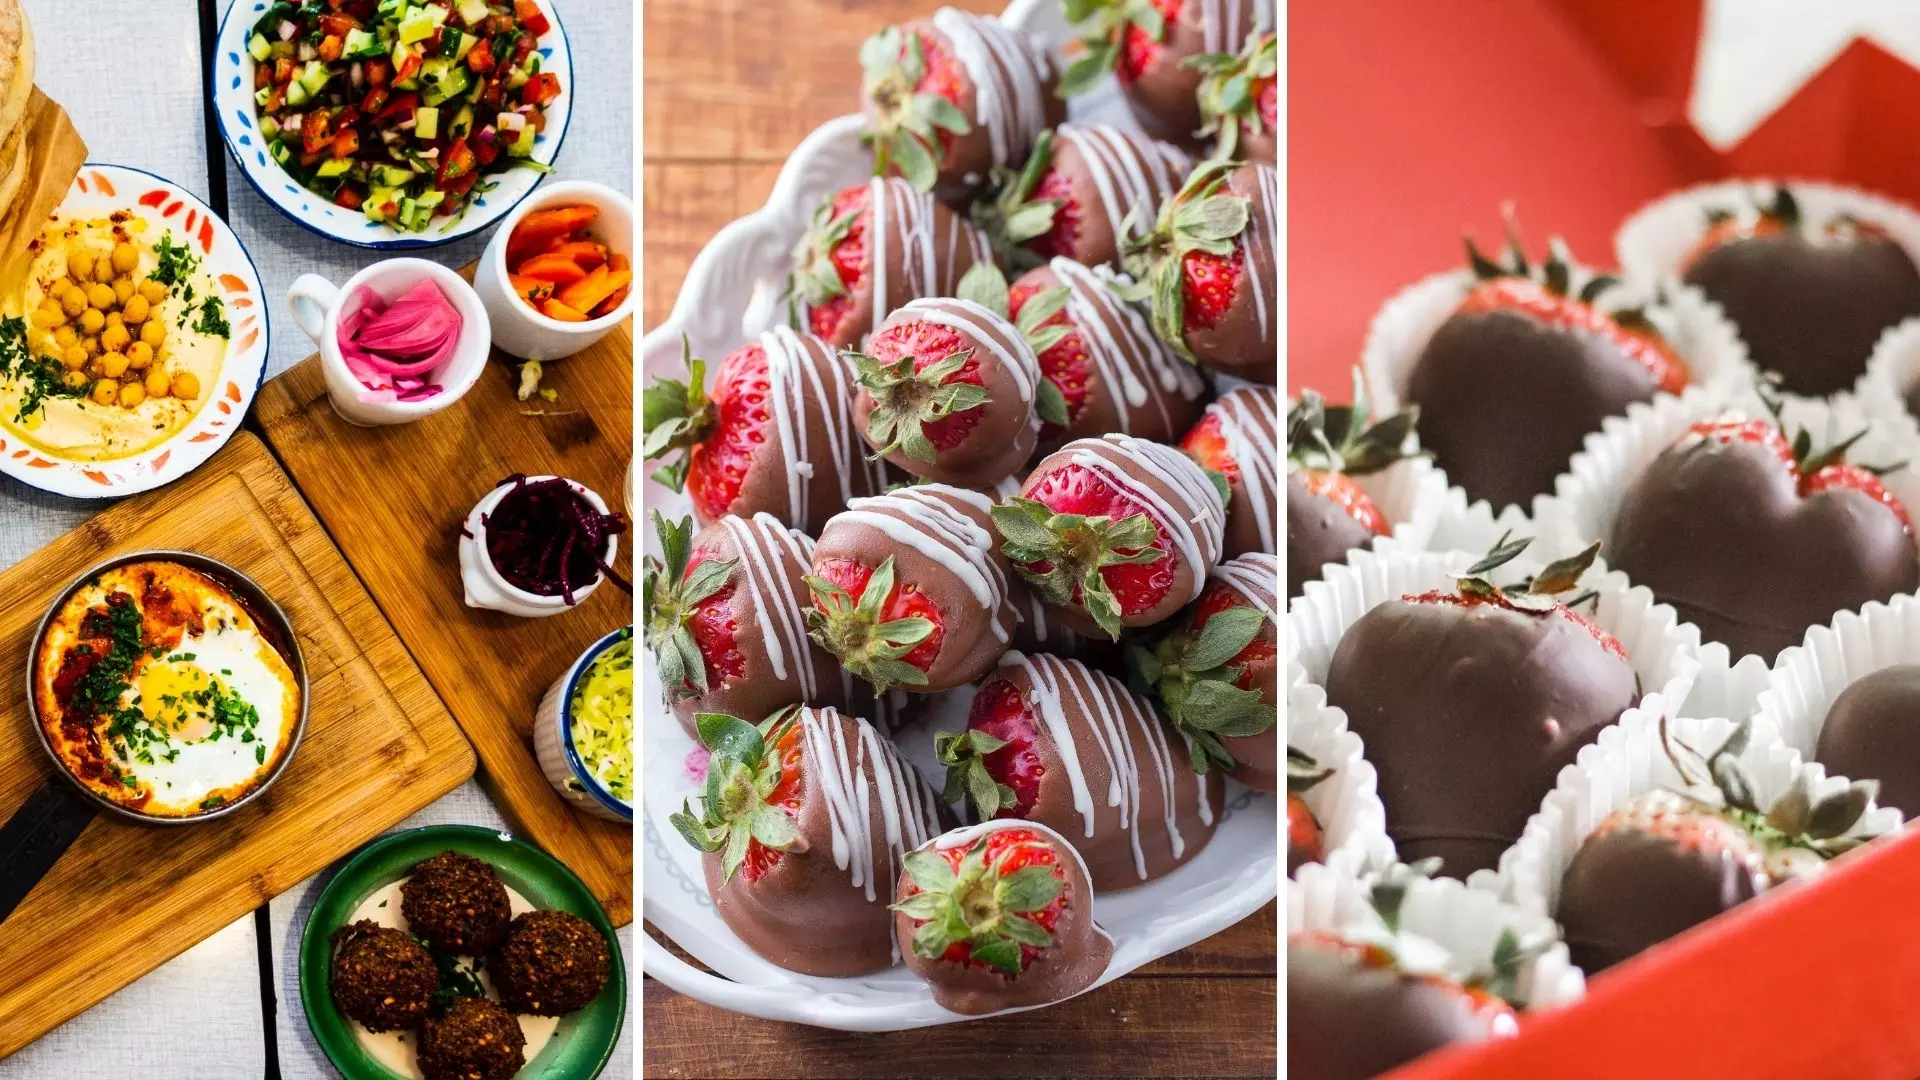 Love is not in the air until its on the table. Check out these 20 recipes and make Valentines Day extra special